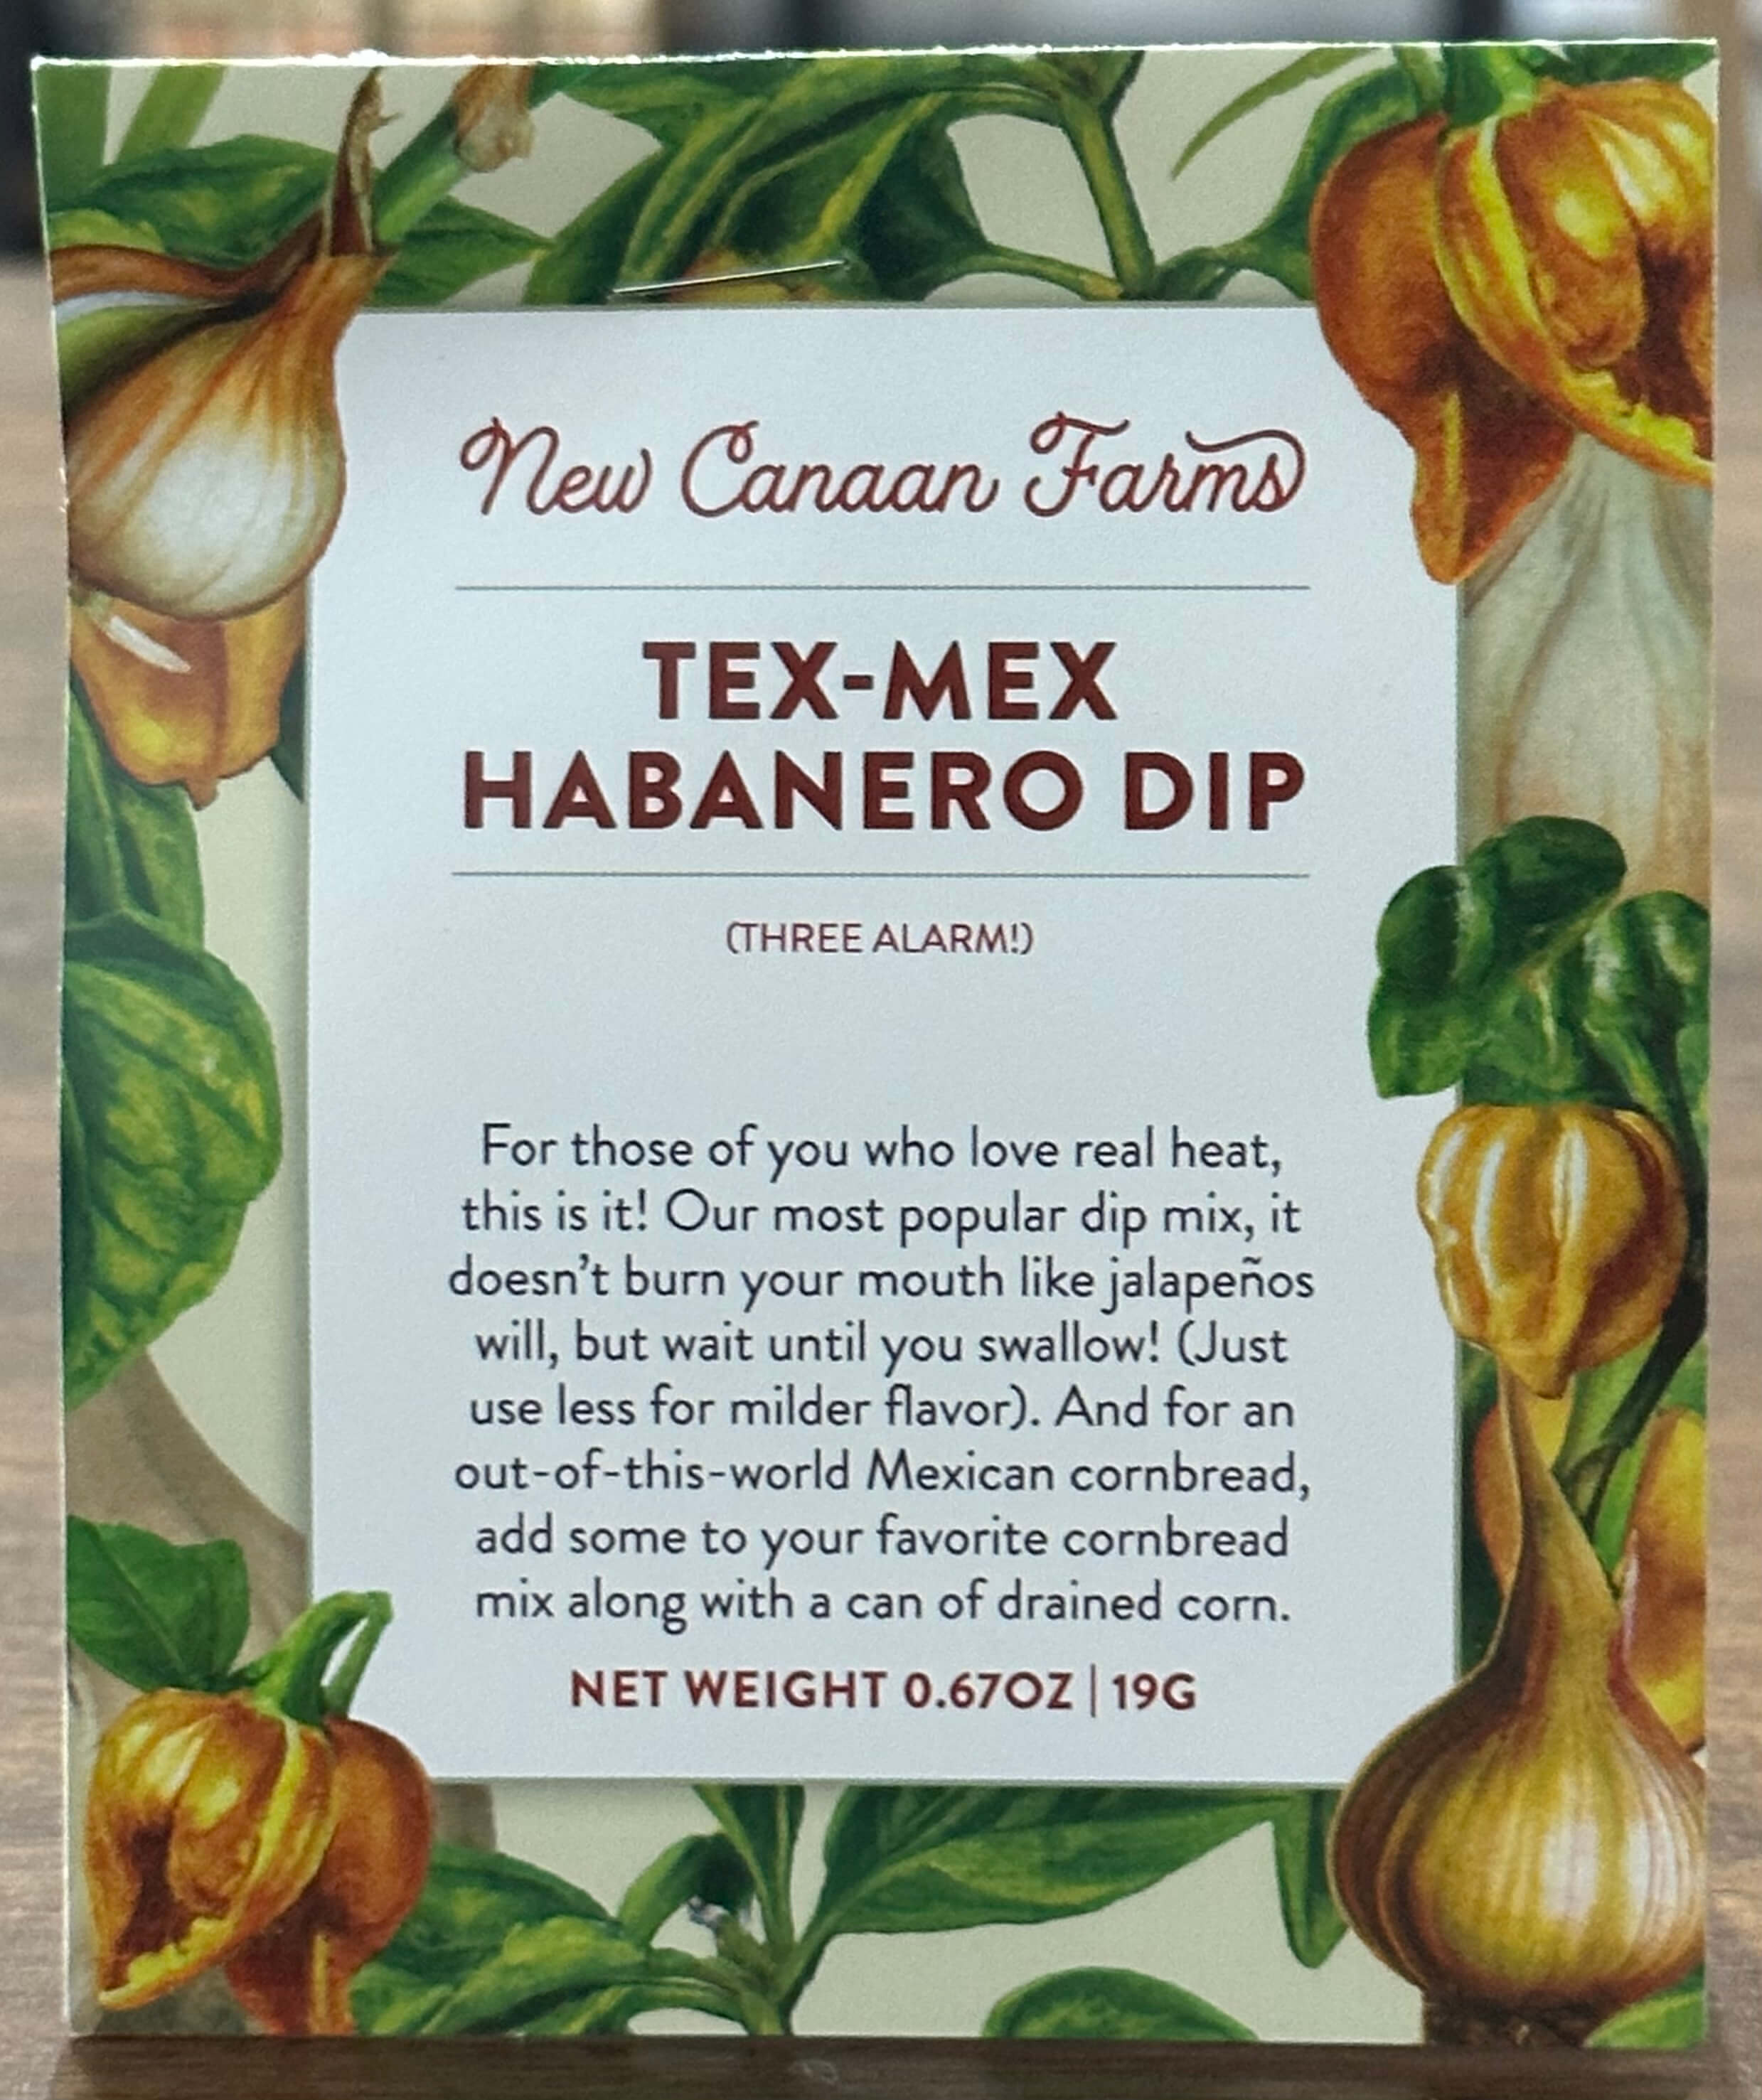 New Canaan Farms Tex-Mex Habanero Dip in a sealed pouch.